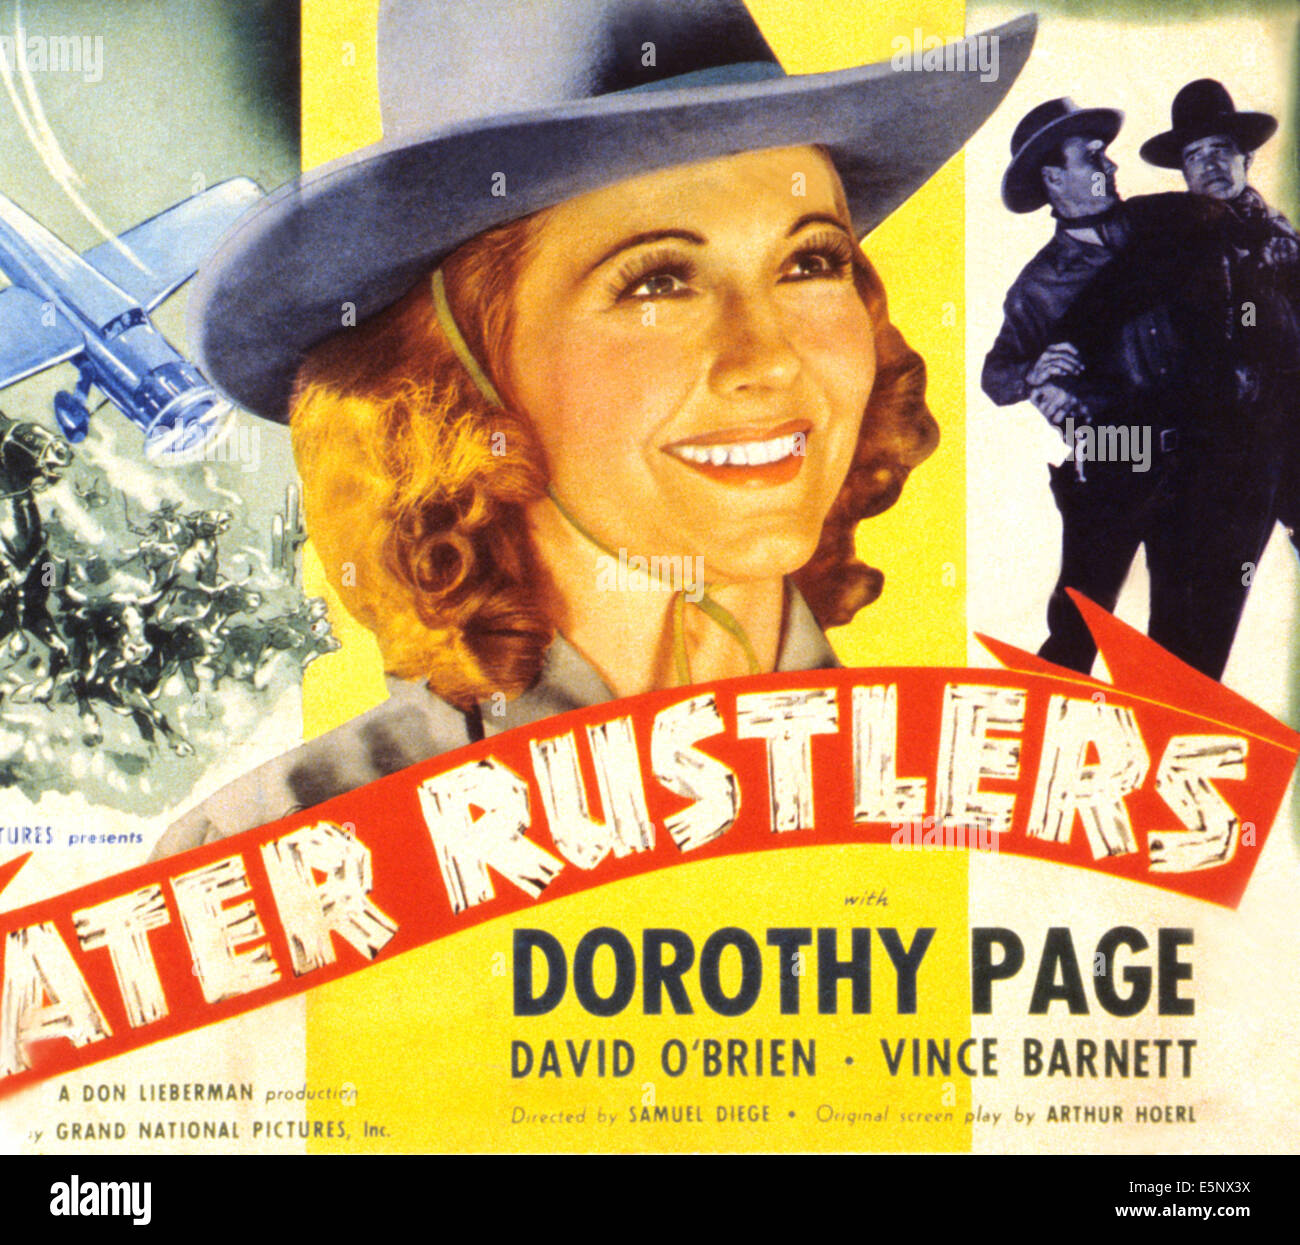 WATER RUSTLERS, center: Dorothy Page, second from right: Dave O'Brien on title lobbycard, 1939. Stock Photo